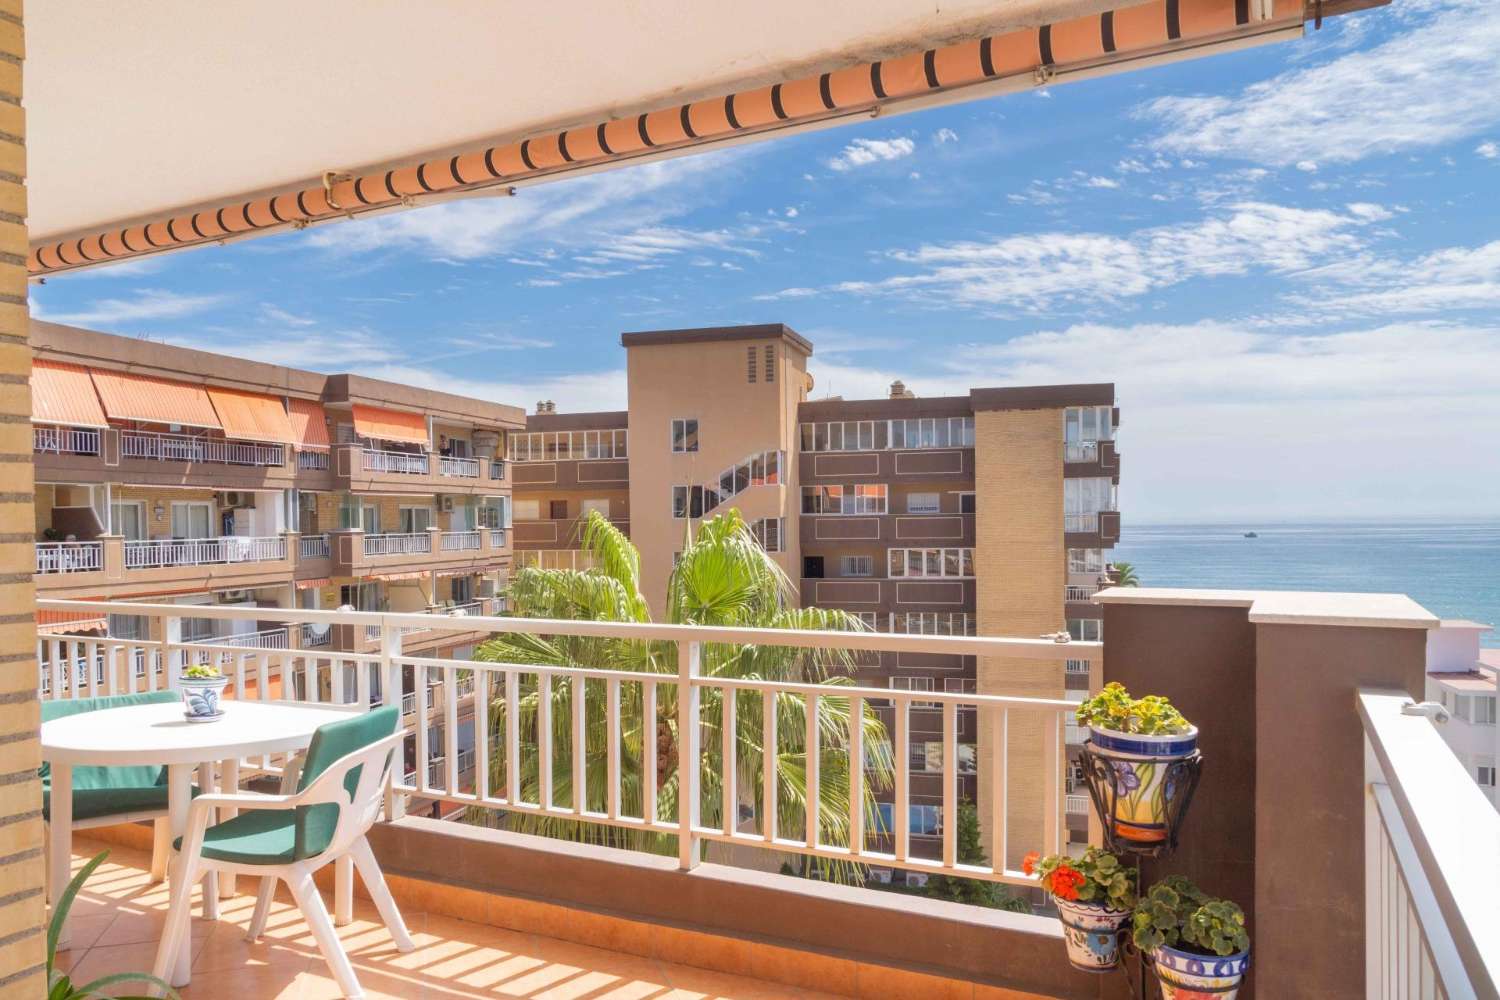 Fantastic flat located 1st line of beach, with views pool and garage